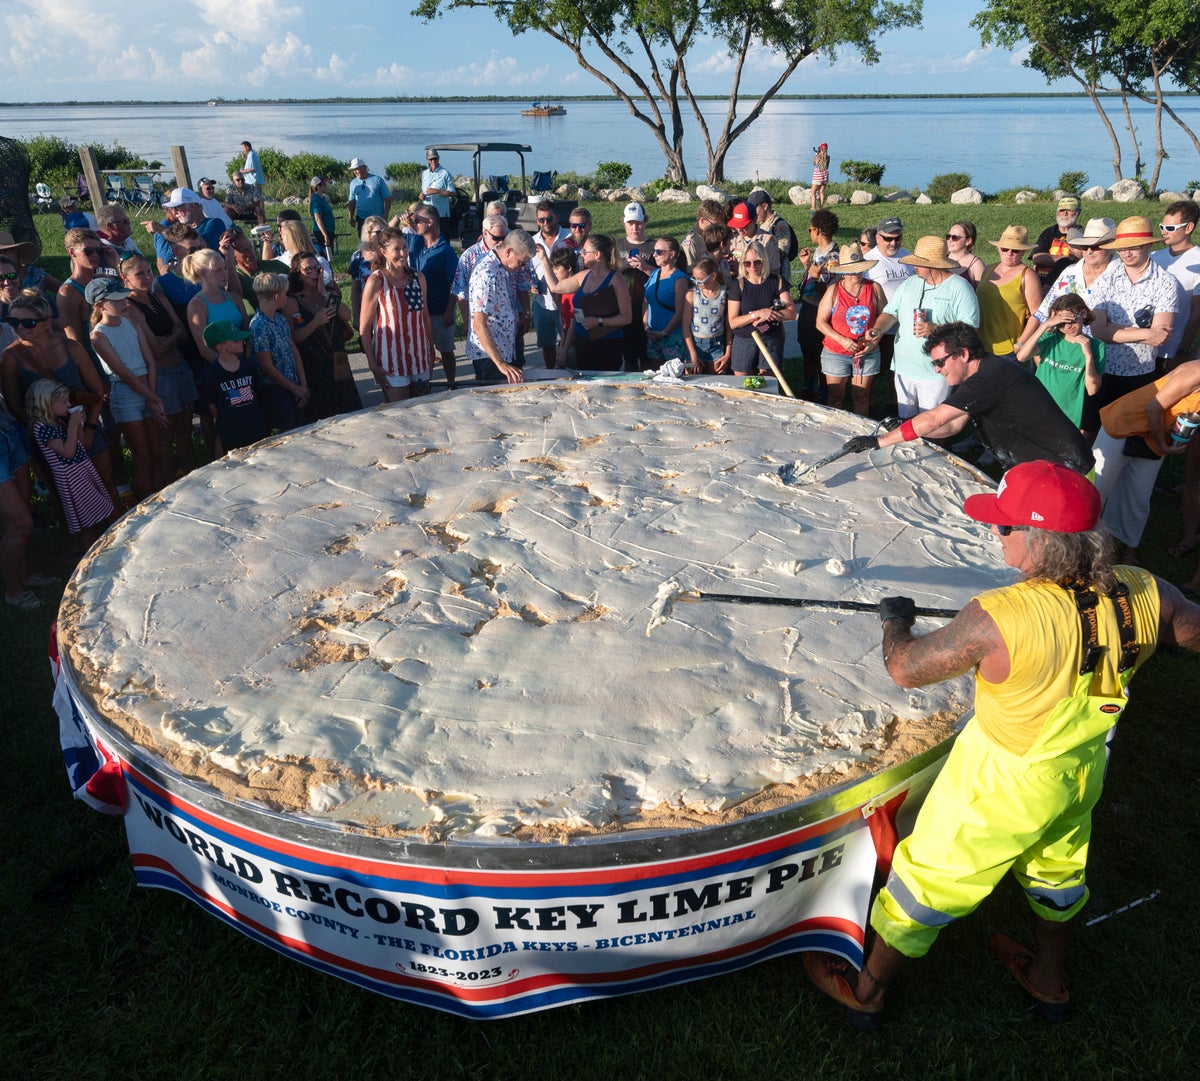 A sweet slice of history: Florida Keys celebrate 200th birthday with giant Key lime pie